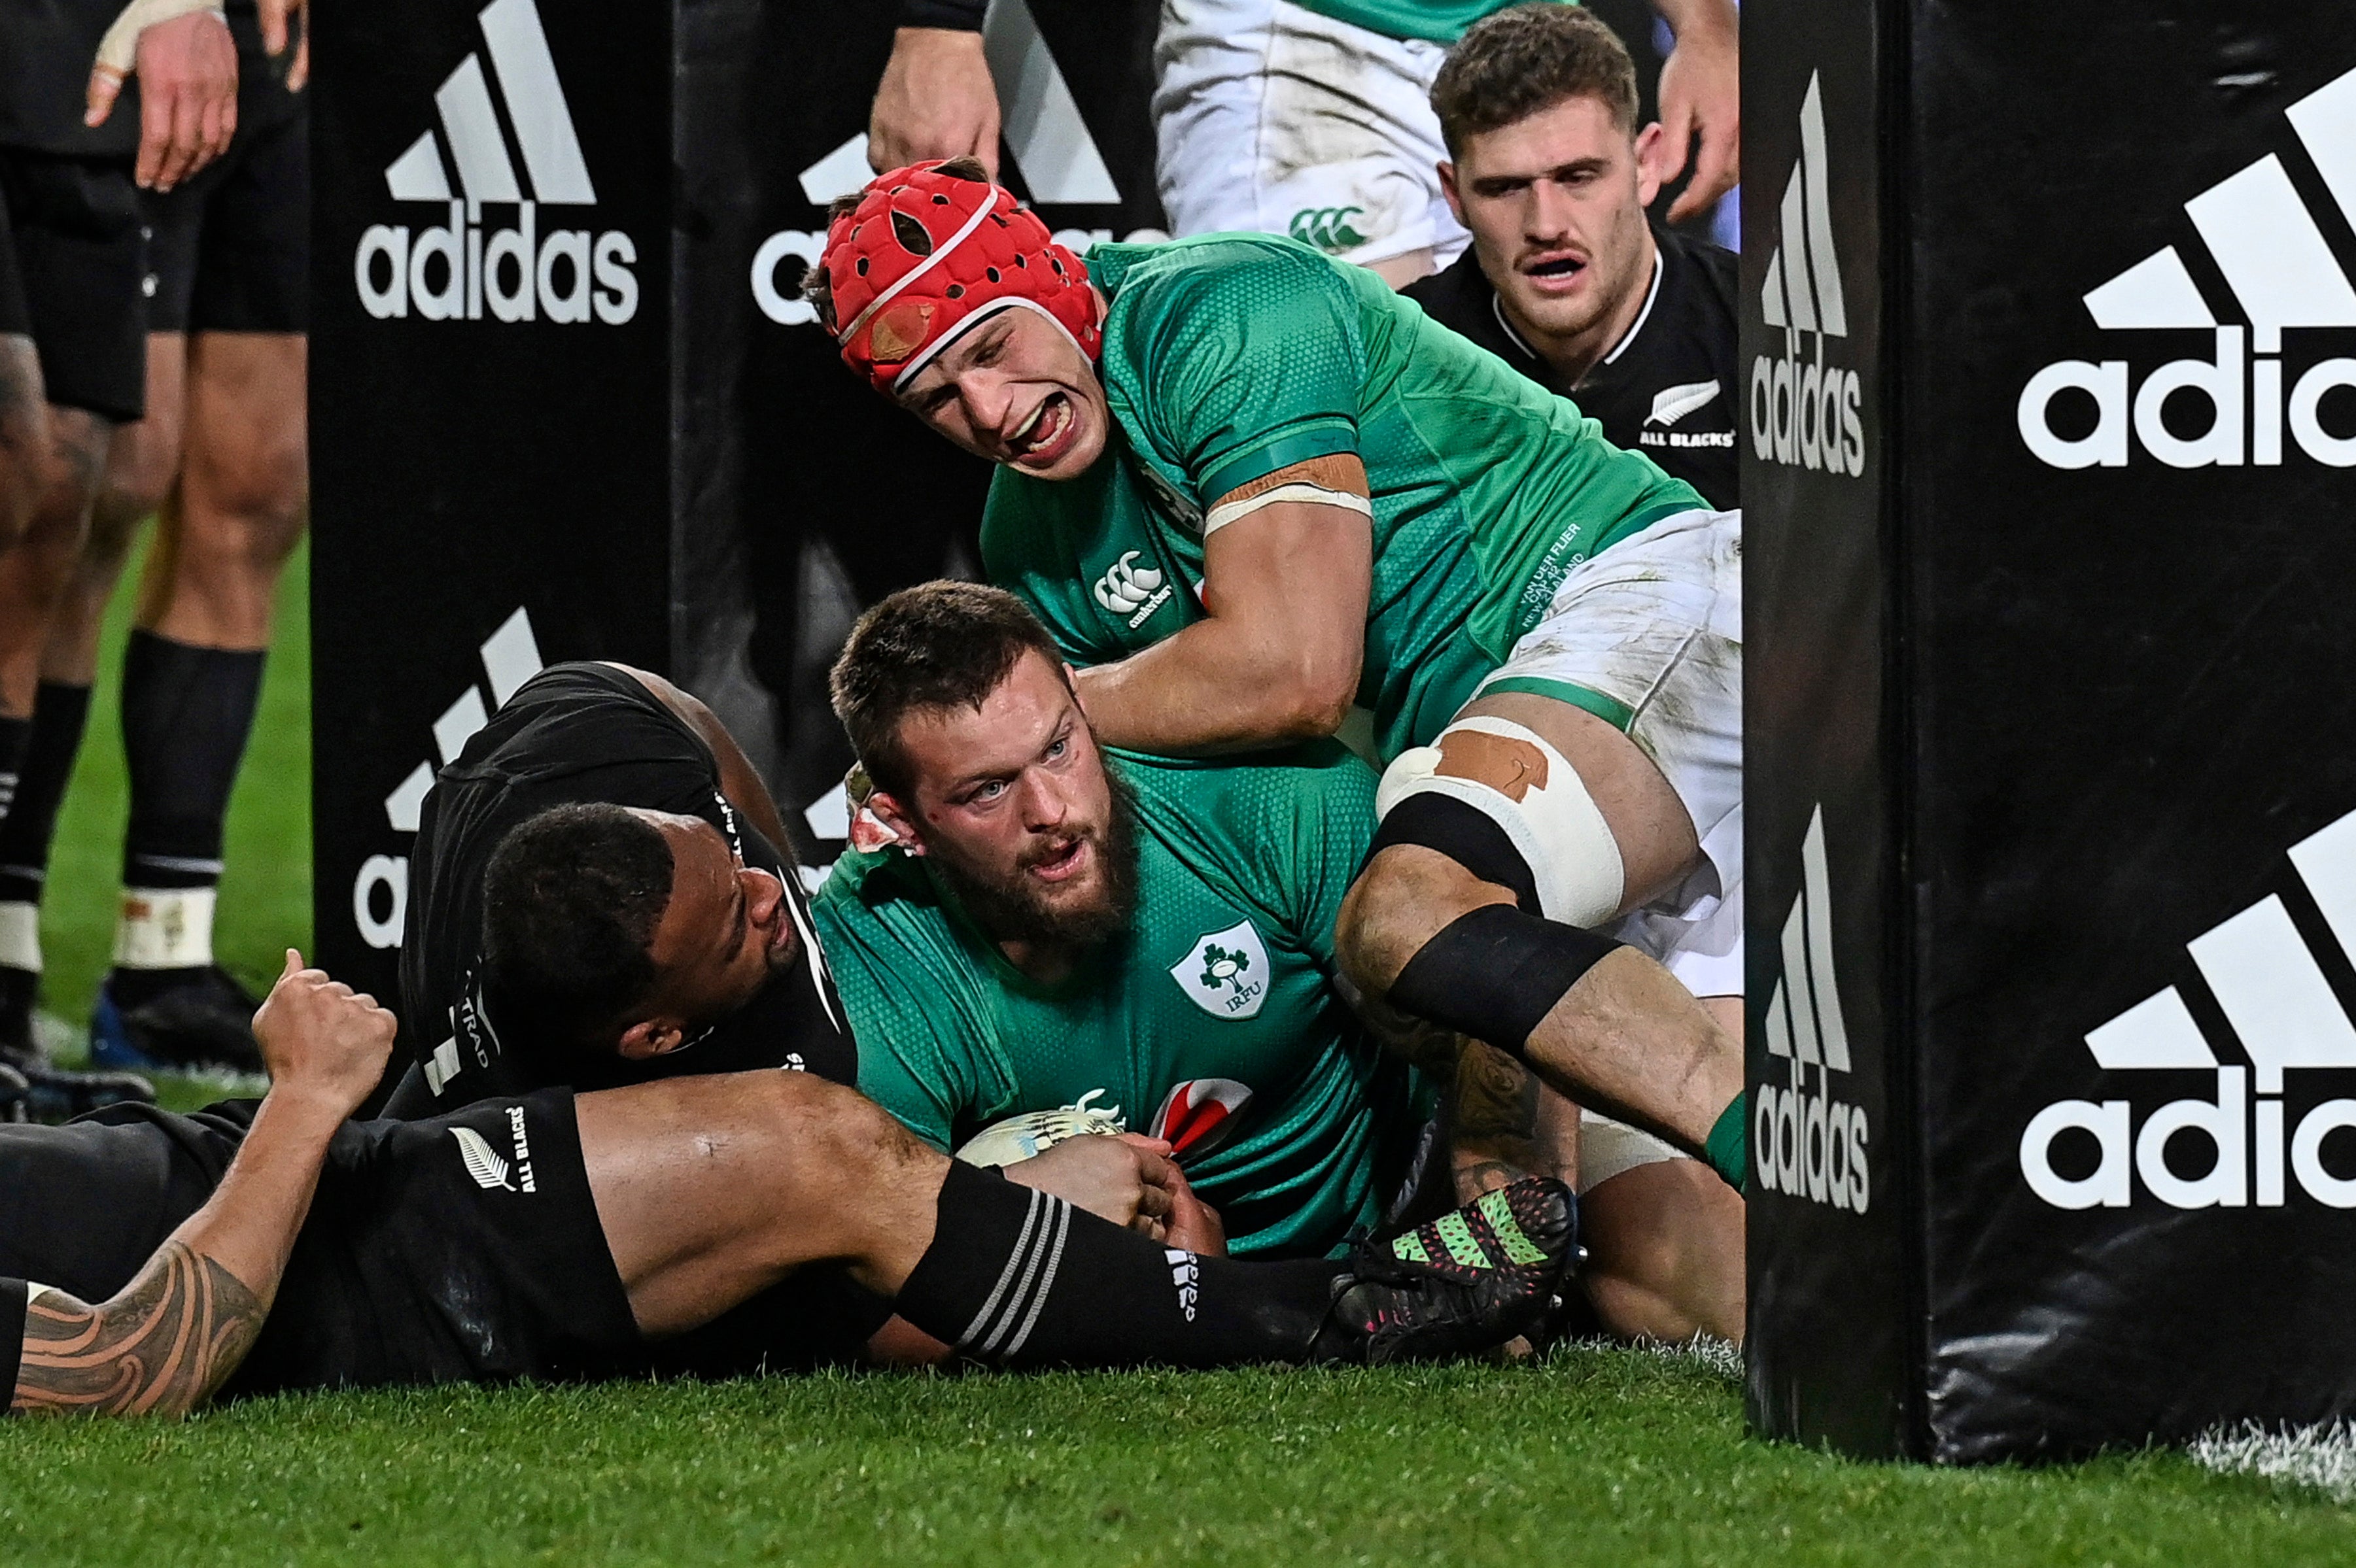 Porter (bottom centre) scores his second try for Ireland